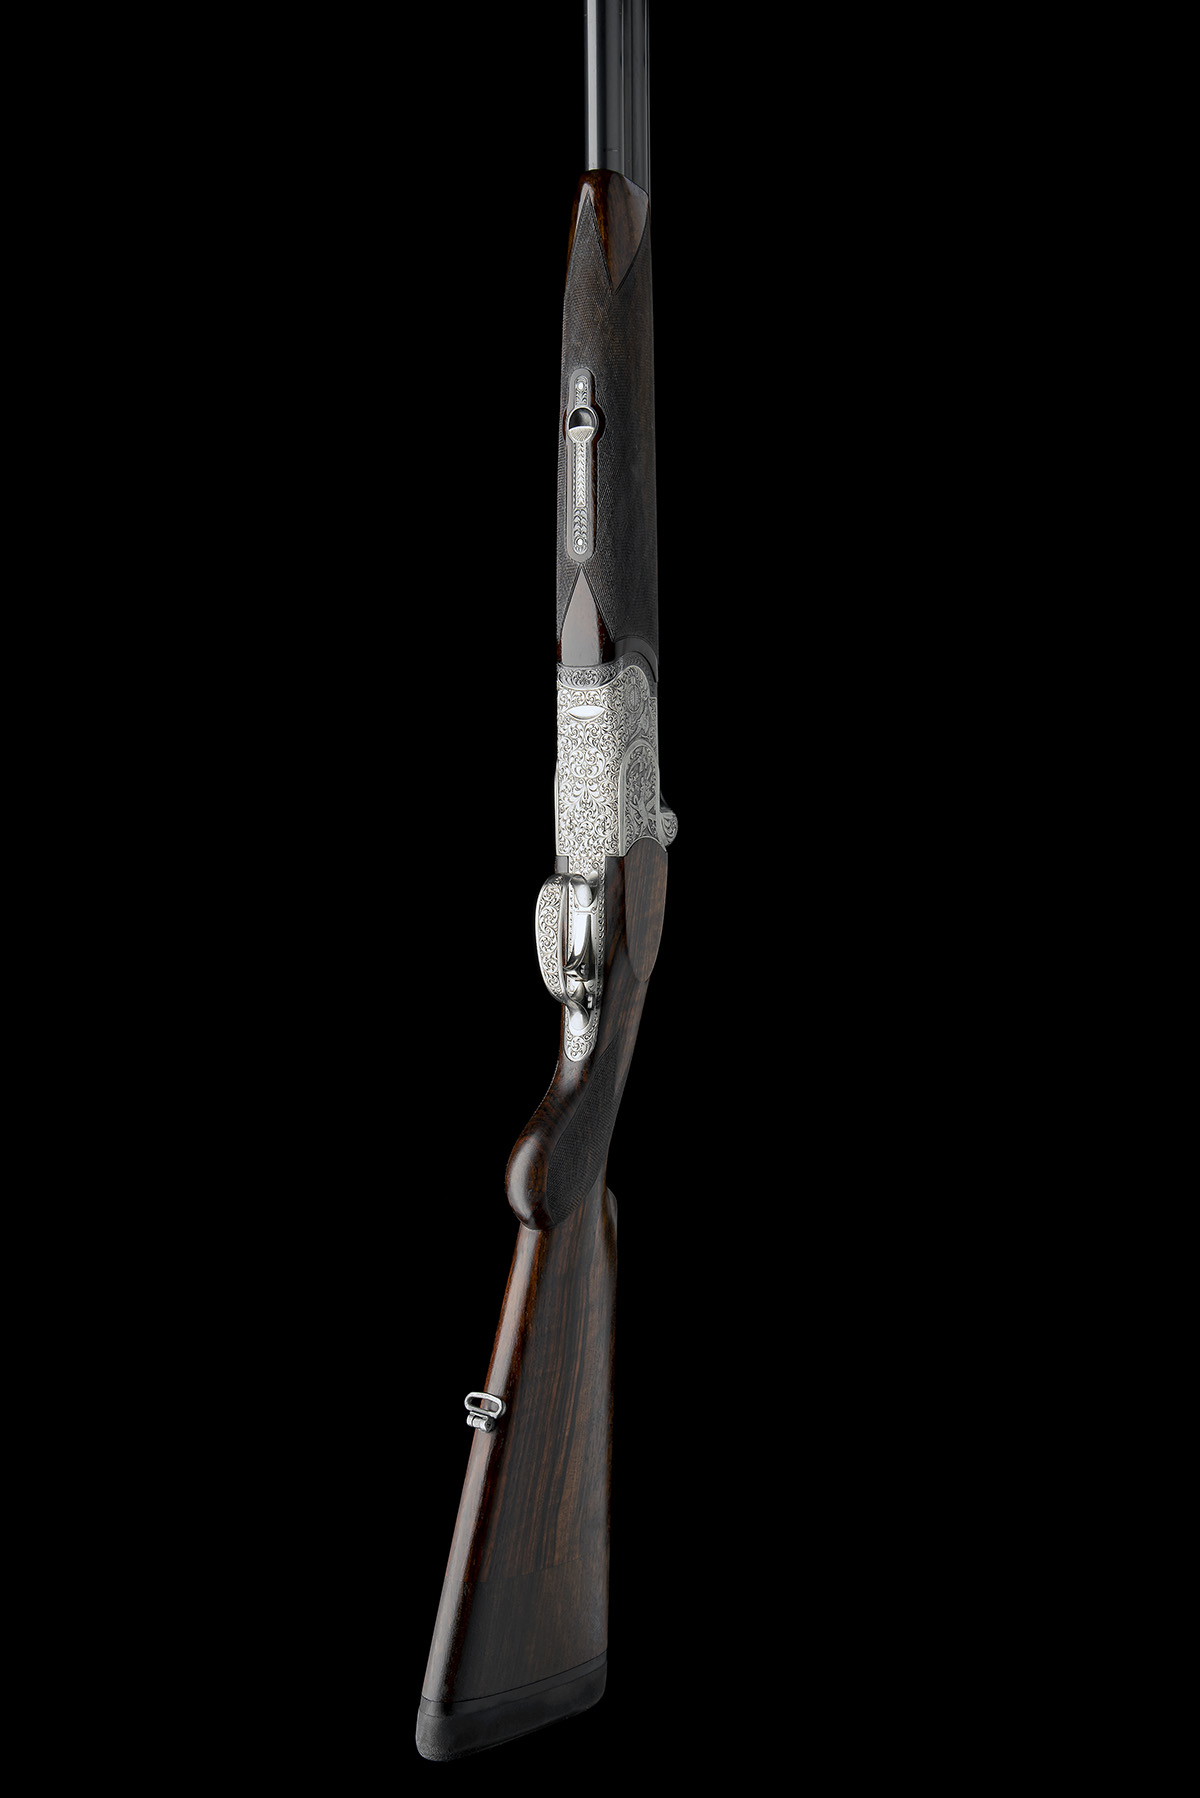 G. GAMBA A 12-BORE 'WIRNHIER SPEZIAL JAGD 67' SINGLE-TRIGGER OVER AND UNDER DETACHABLE - Image 5 of 10